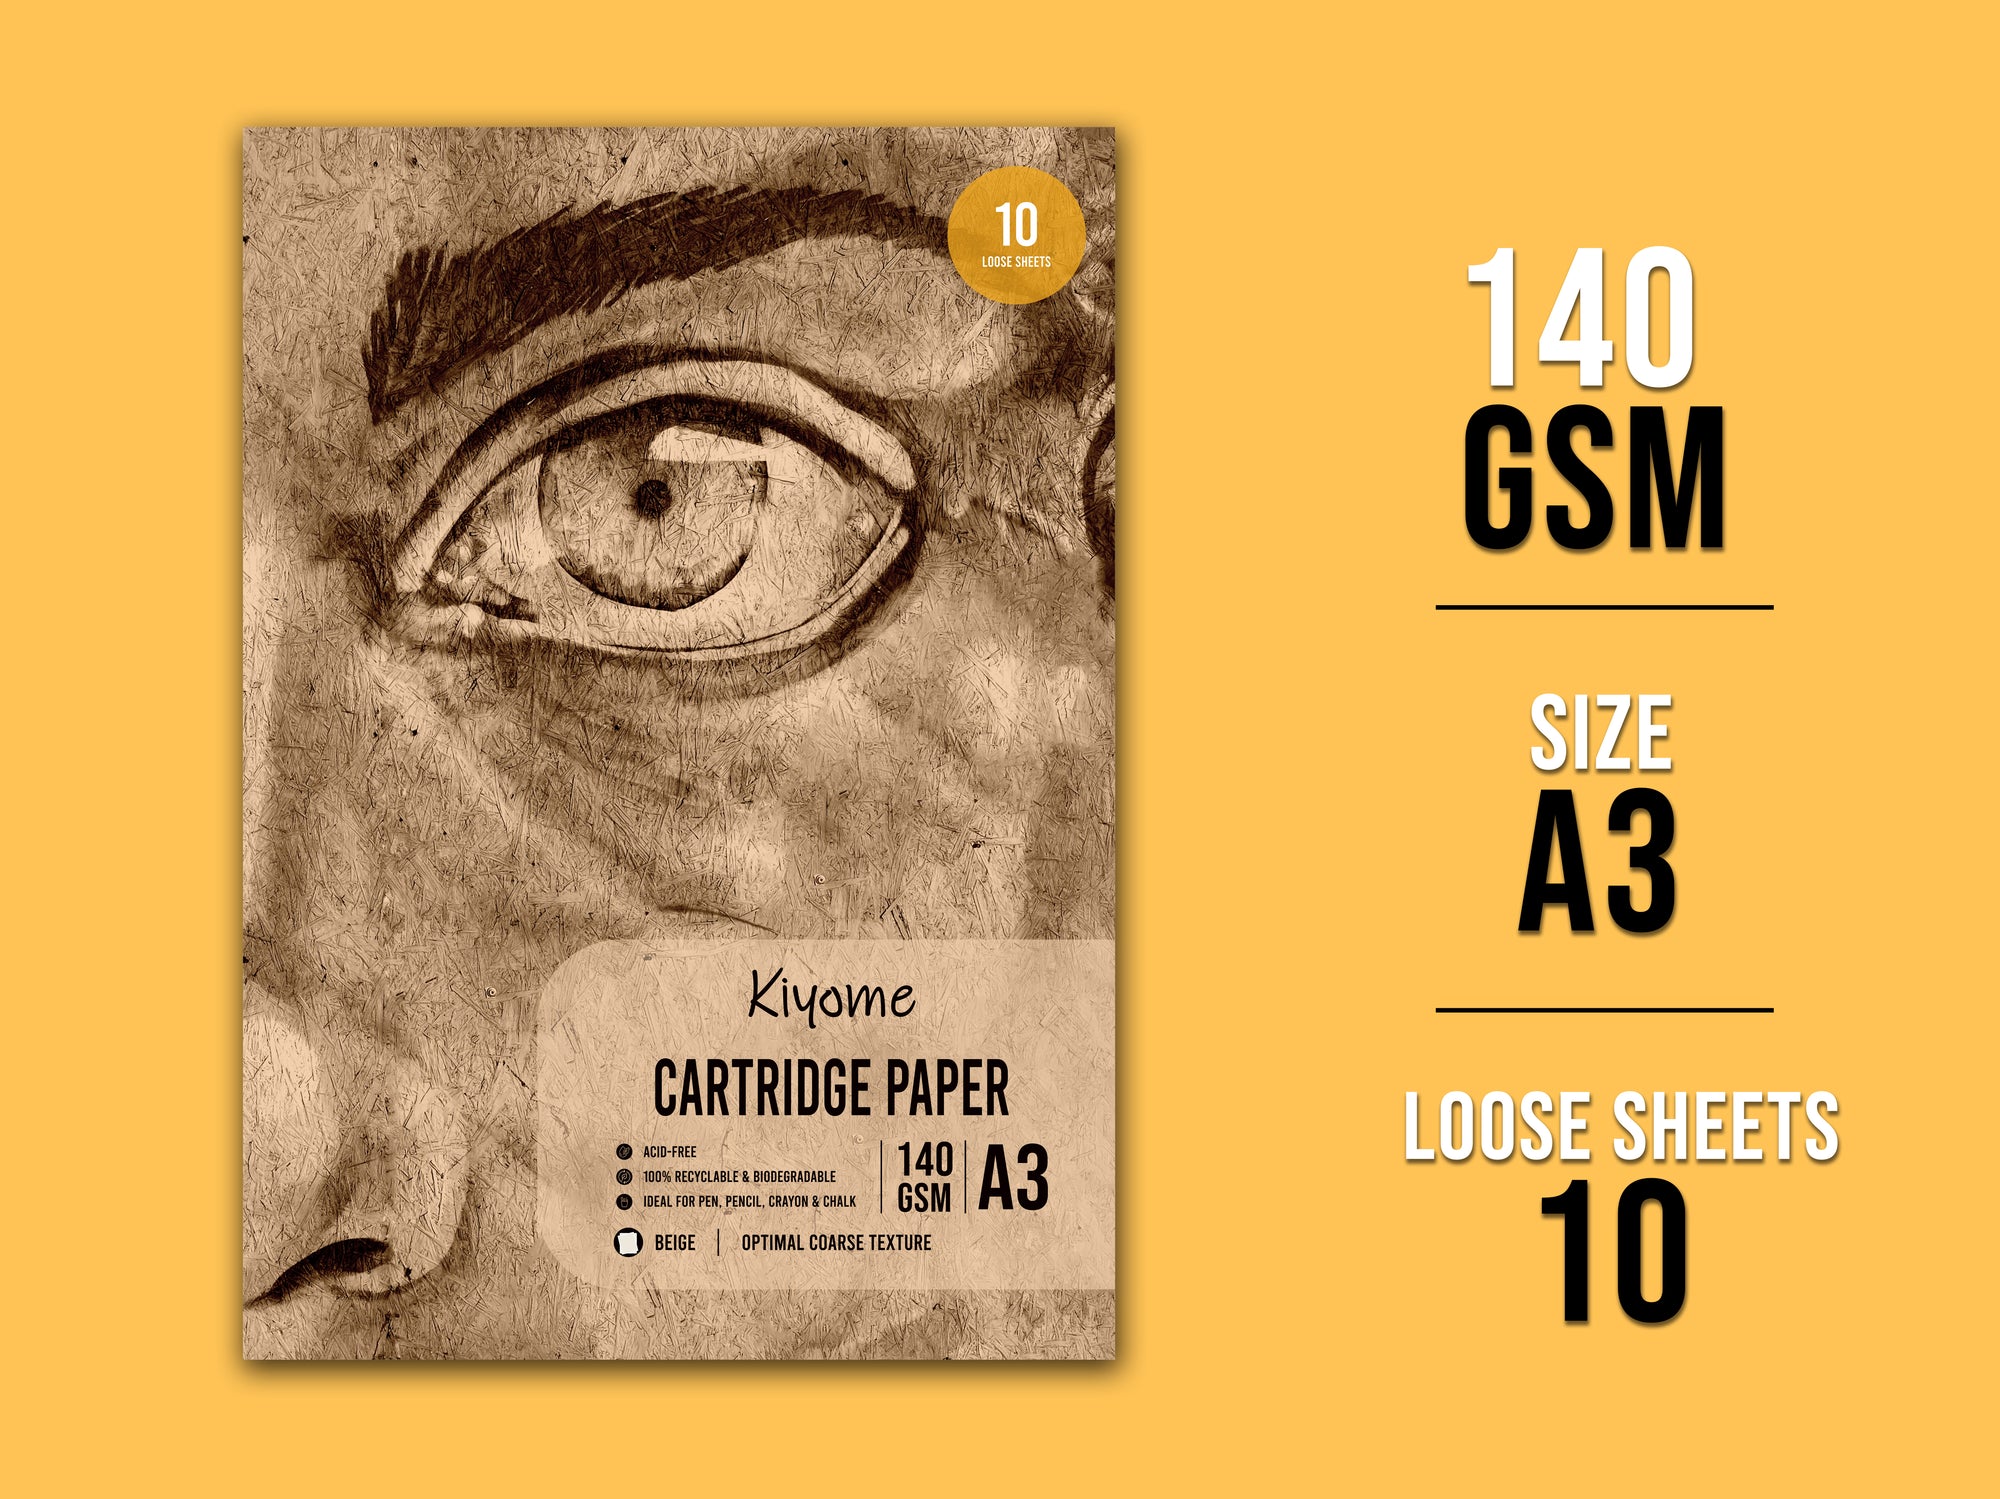 Kiyome Beige Cartridge Paper | 140 GSM | A3 | 10 Sheets